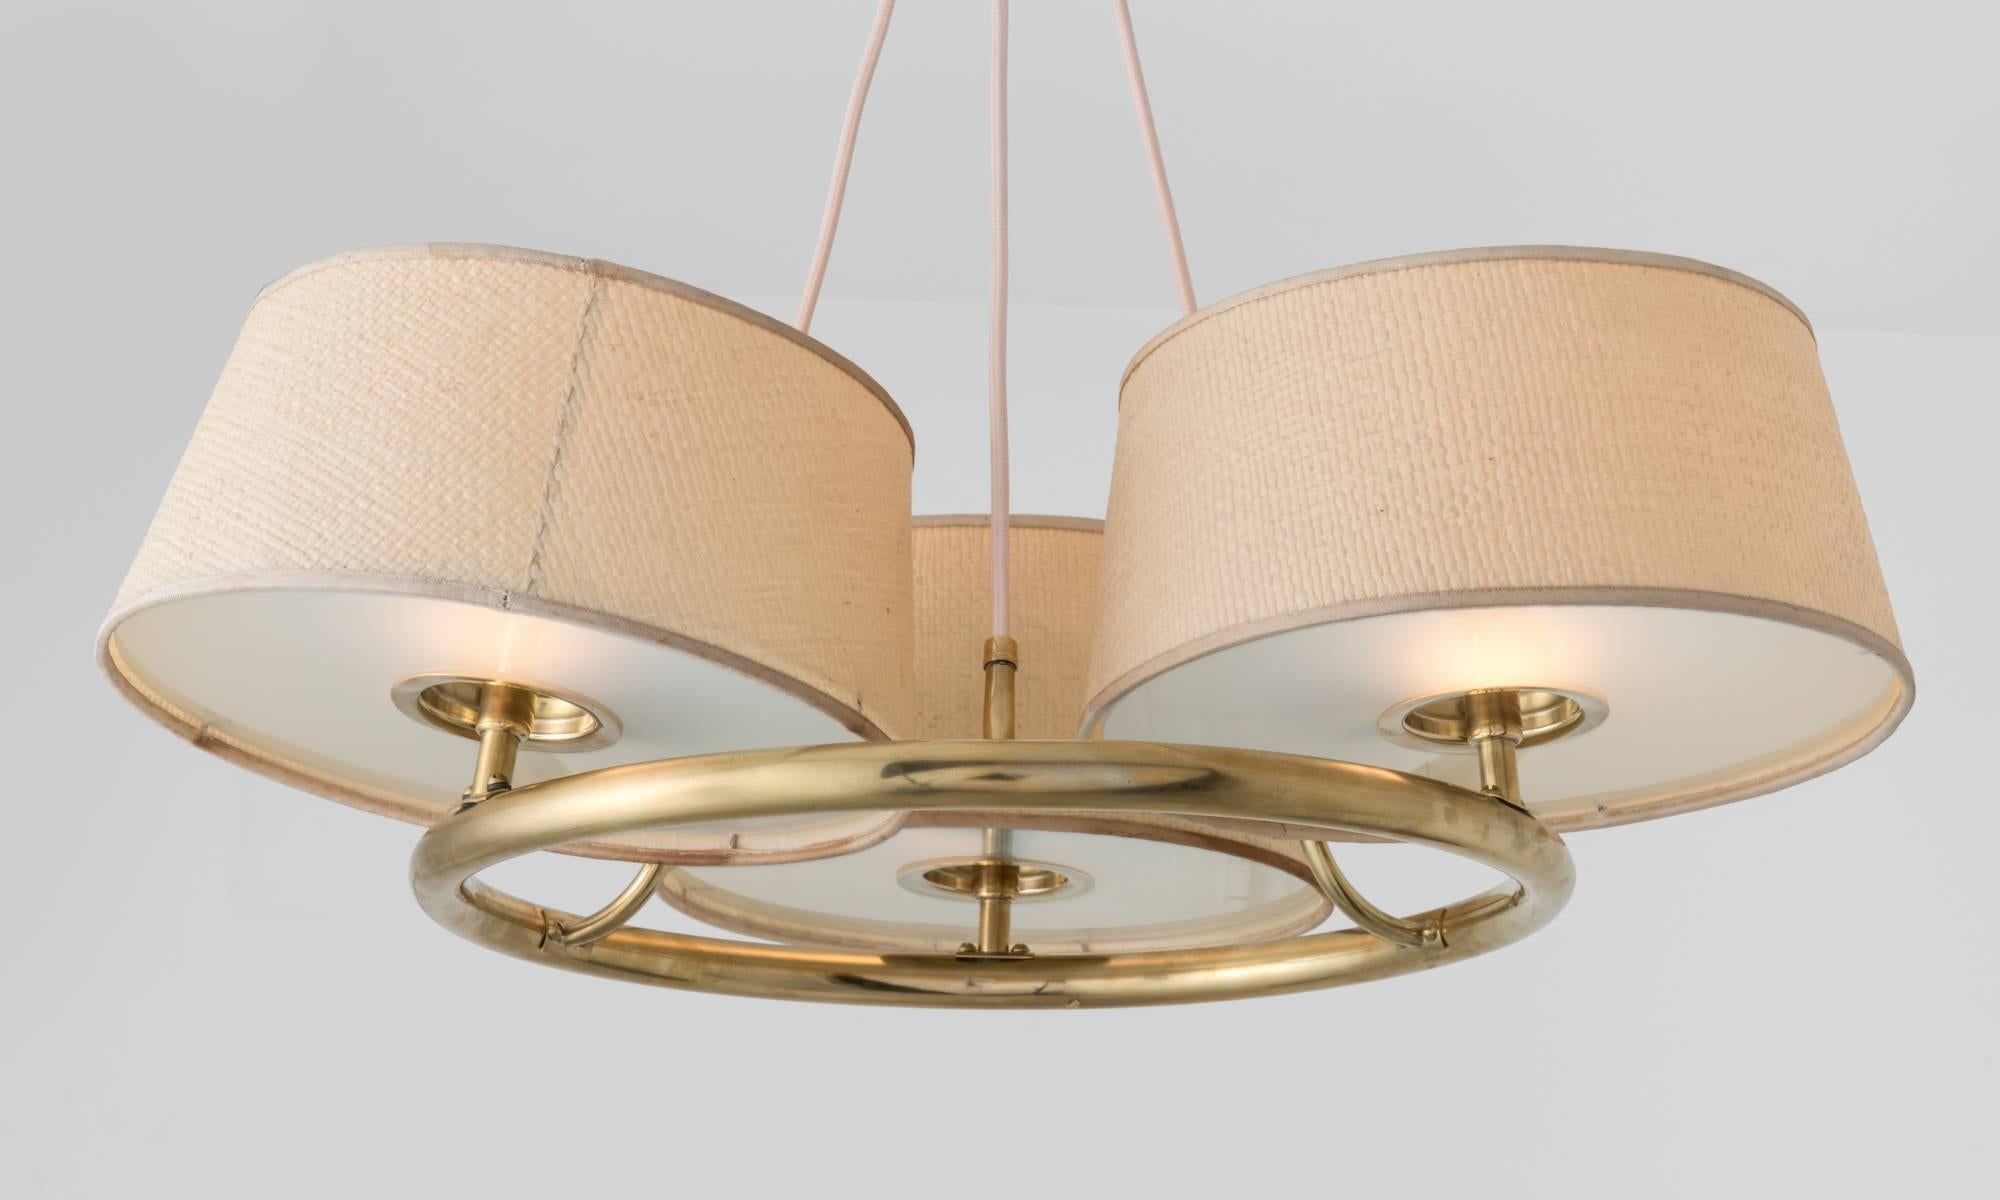 Paavo Tynell Chandelier, circa 1950

Elegant circular form with polished brass hardware, frosted glass and linen shades. 

8